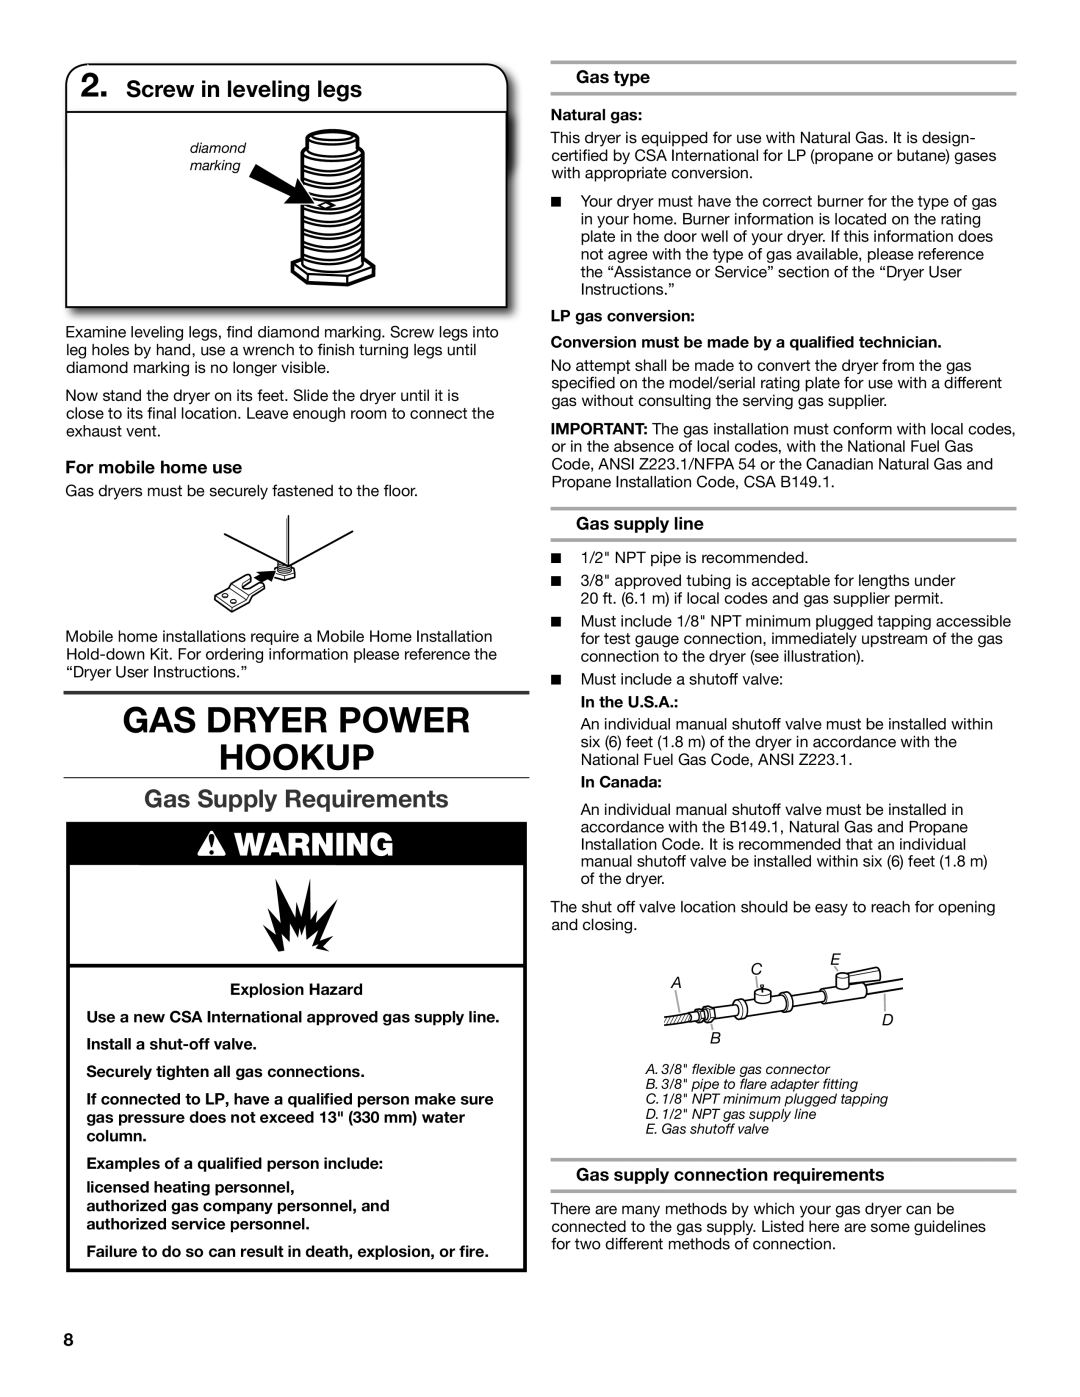 Maytag MGDX600XW Gas Dryer Power Hookup, Gas Supply Requirements, Screw in leveling legs, For mobile home use, Gas type 